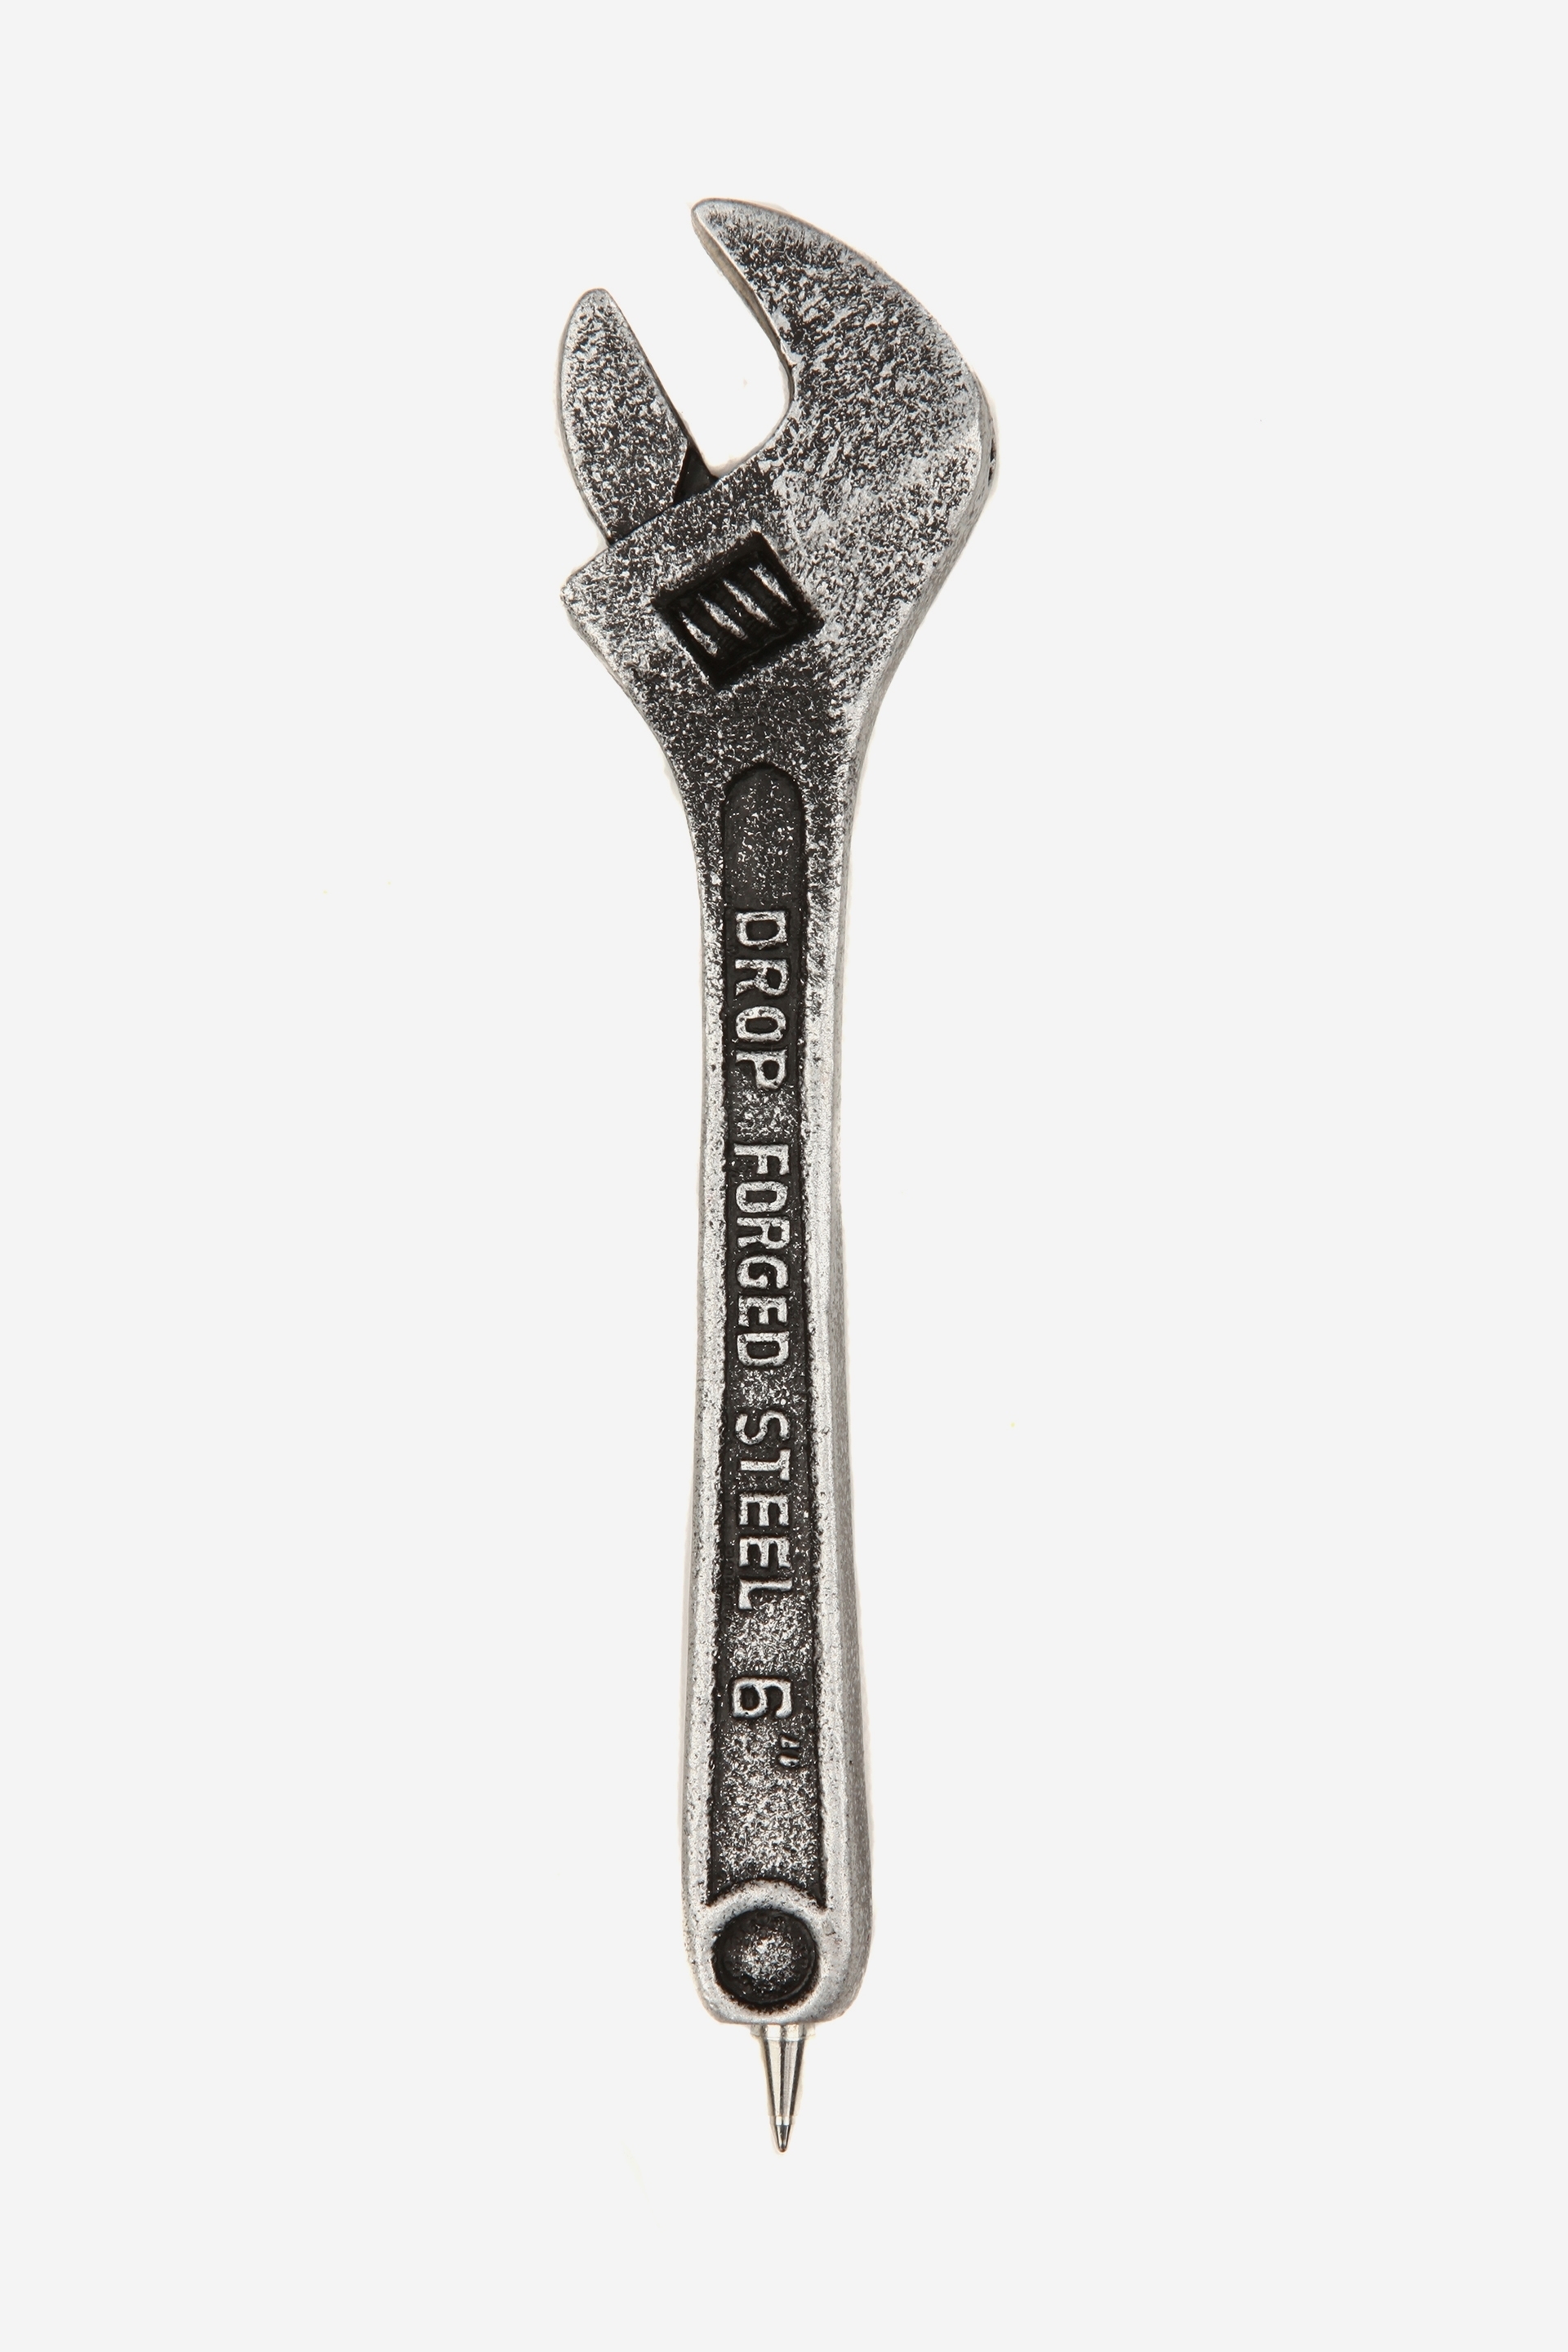 Typo - The Novelty Pen - Wrench 2